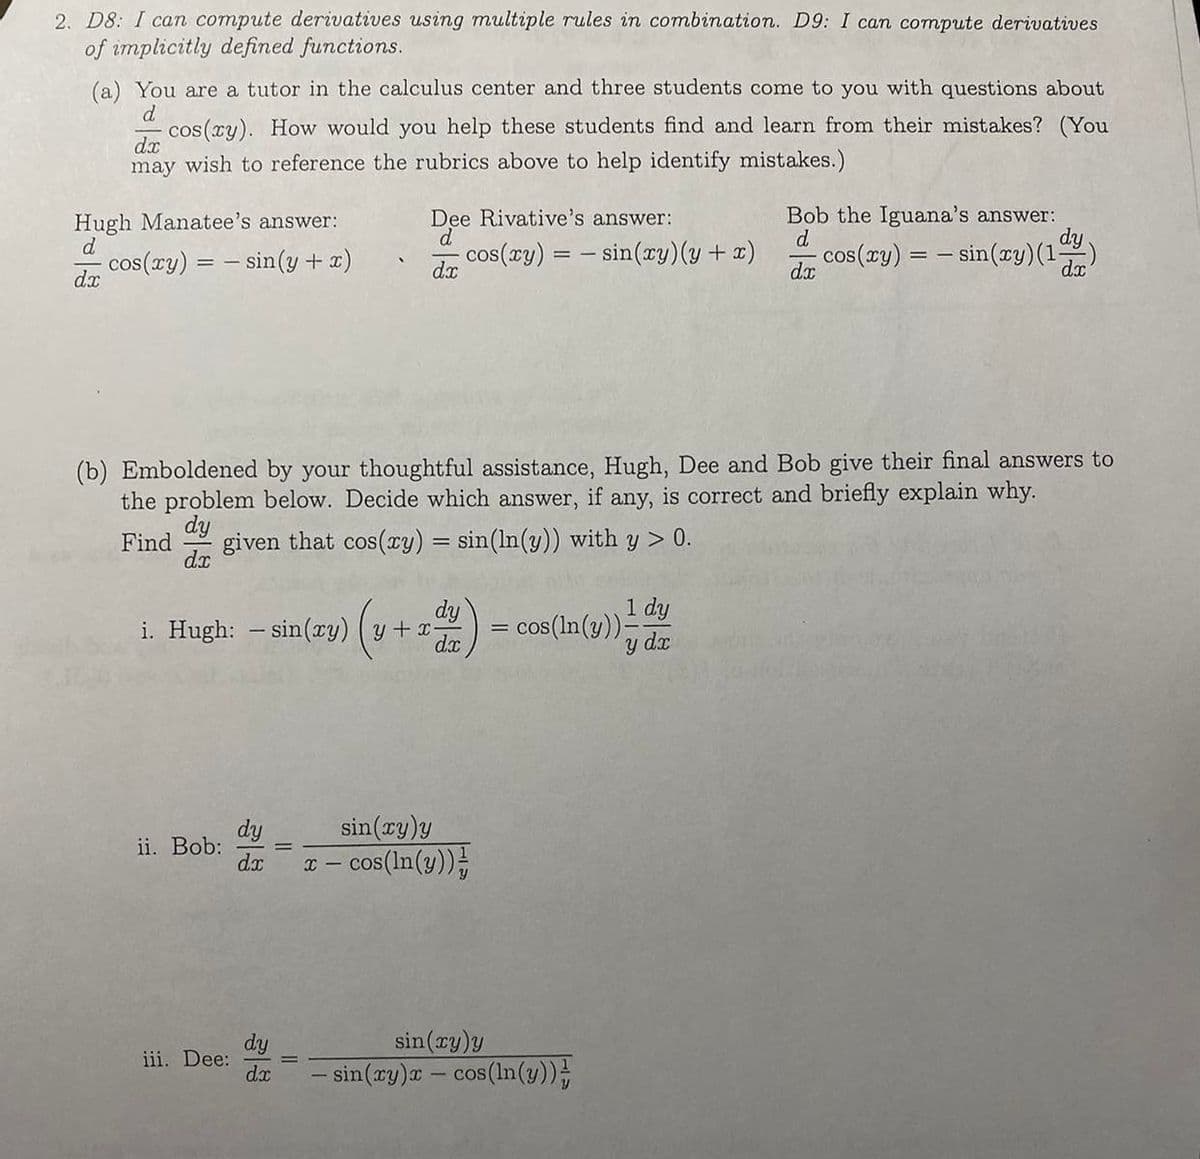 2. D8: I can compute derivatives using multiple rules in combination. D9: I can compute derivatives
of implicitly defined functions.
(a) You are a tutor in the calculus center and three students come to you with questions about
d
- cos(xy). How would you help these students find and learn from their mistakes? (You
may wish to reference the rubrics above to help identify mistakes.)
dx
Hugh Manatee's answer:
d
cos(xy) = sin(y + x)
dx
ii. Bob:
i. Hugh: sin(xy) (y + x-
iii. Dee:
Dee Rivative's answer:
d
dx
(b) Emboldened by your thoughtful assistance, Hugh, Dee and Bob give their final answers to
the problem below. Decide which answer, if any, is correct and briefly explain why.
dy
Find given that cos(xy) = sin (ln(y)) with y > 0.
dx
dy
dx
dy
dx
cos(xy)= sin(xy) (y + x)
dy
(v + adv)
dx
sin(xy)y
x − cos(ln(y))
1 dy
y dx
cos (ln(y)).
sin(xy)y
- sin(xy)x - cos (ln(y))
Bob the Iguana's answer:
d
dx
cos(ry) = − sin(ry) (1)